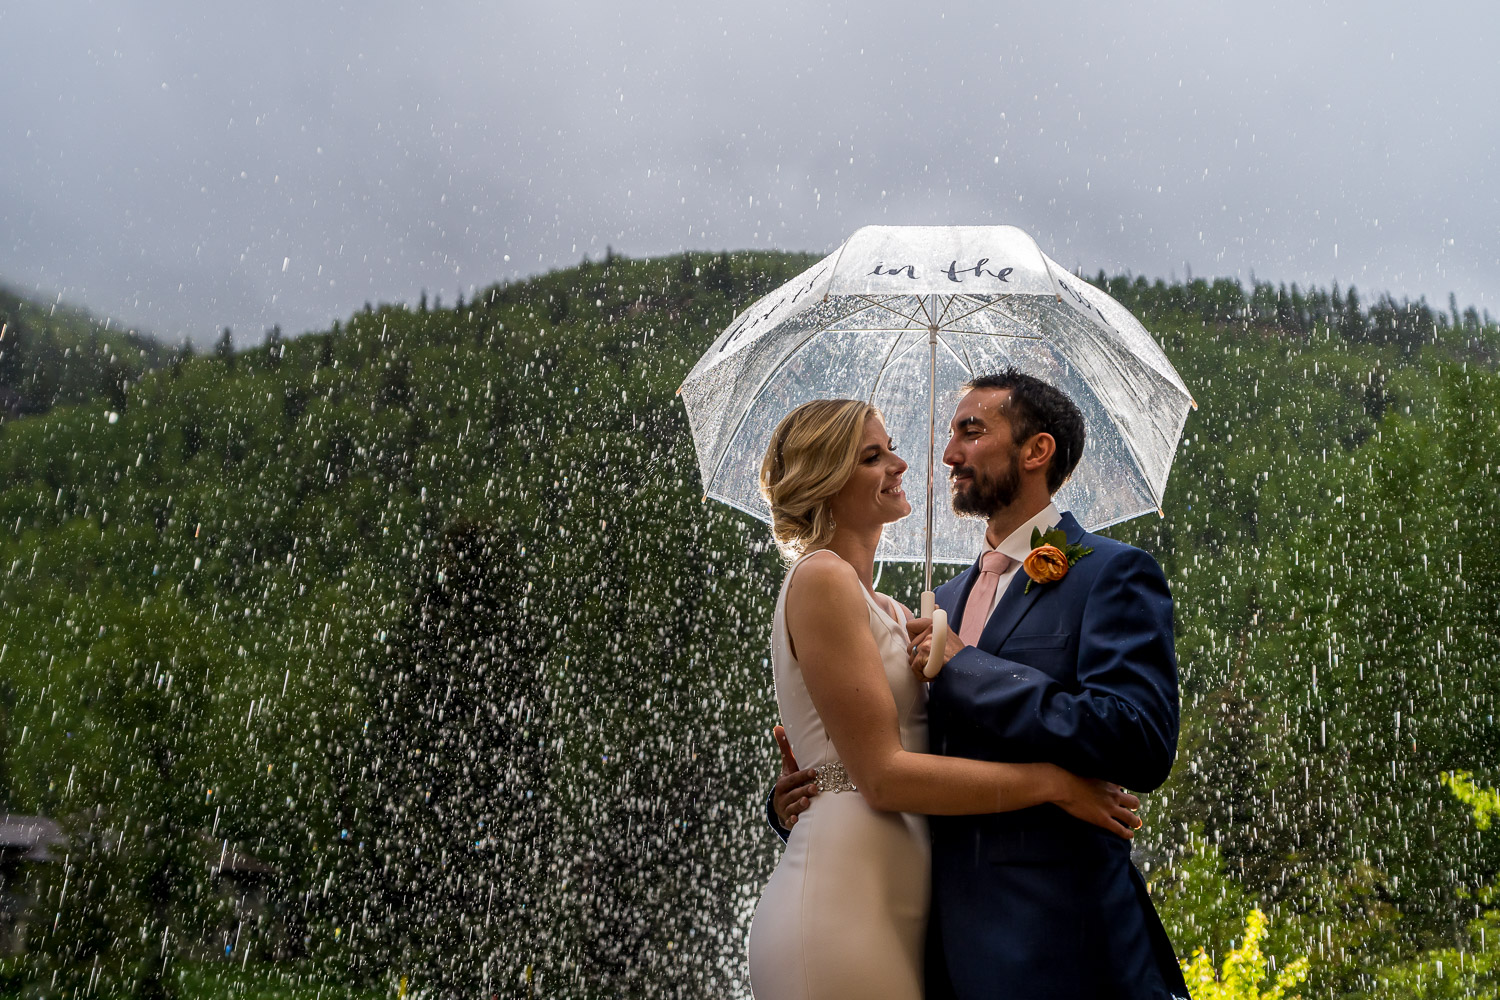 wedding photography in the rain umbrella and back light